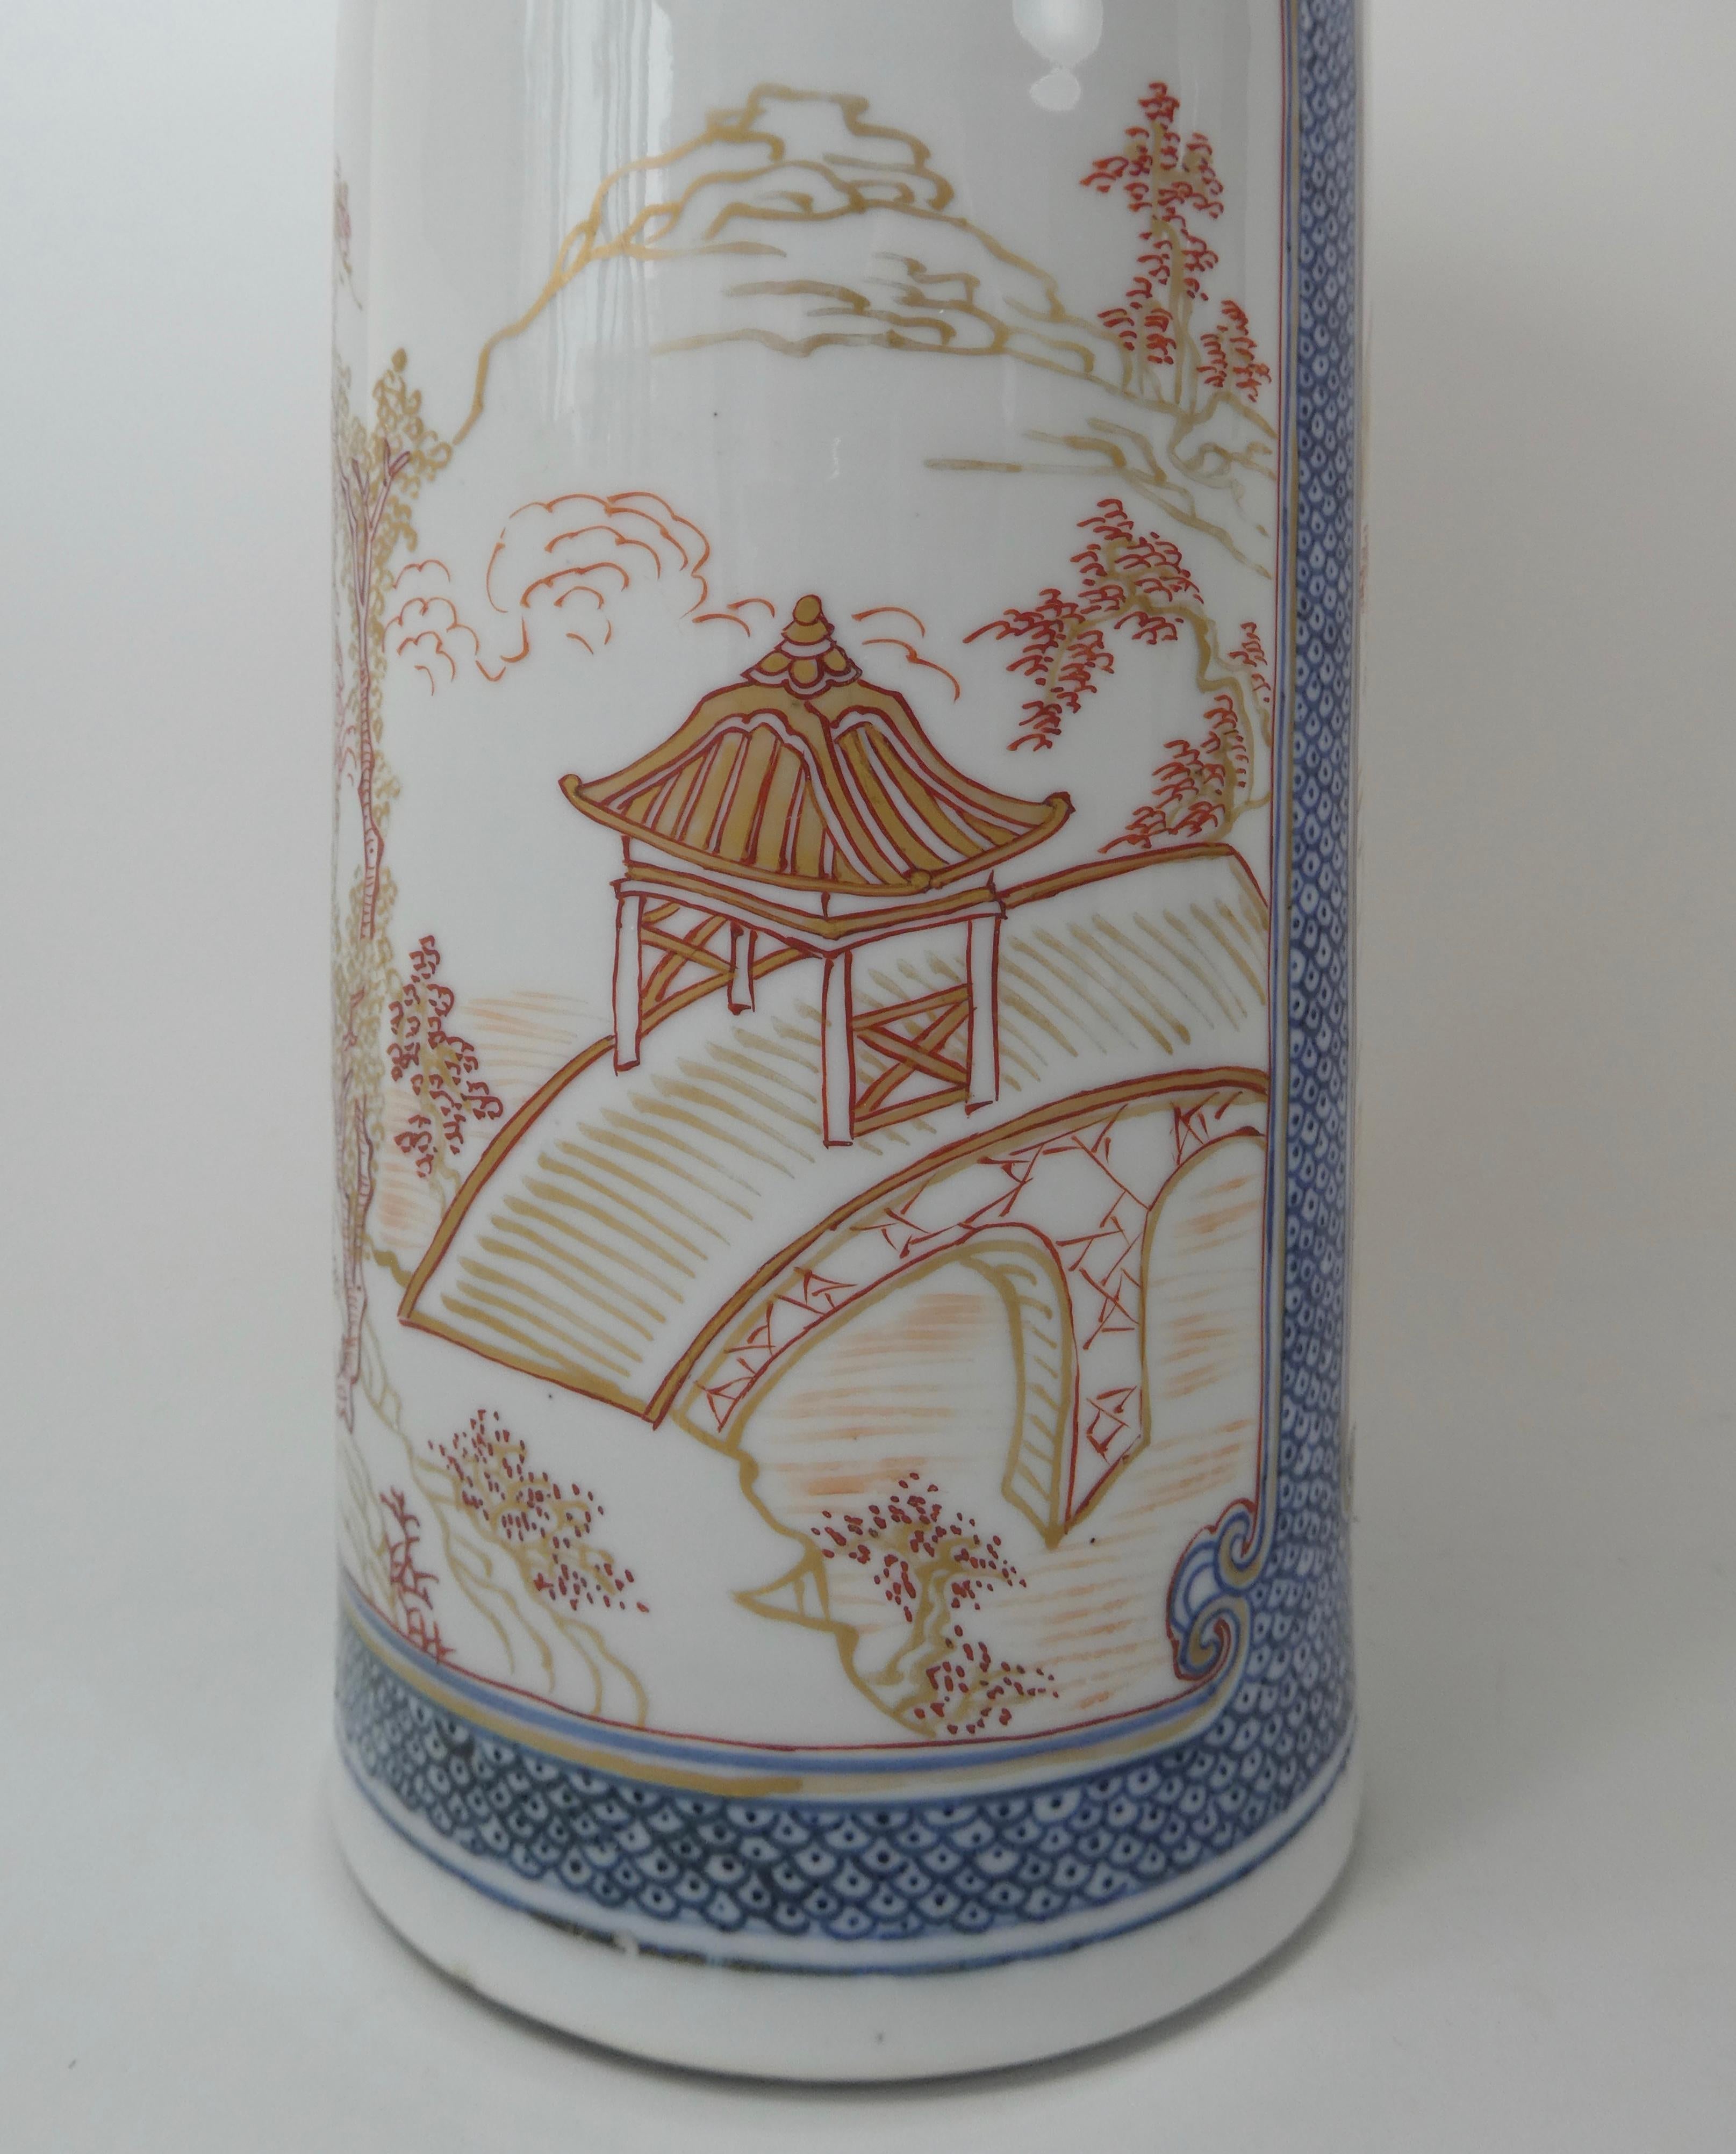 Fired Pair of Chinese Porcelain ‘Rouge de Fer’ Decorated Vases, c. 1700. Kangxi.